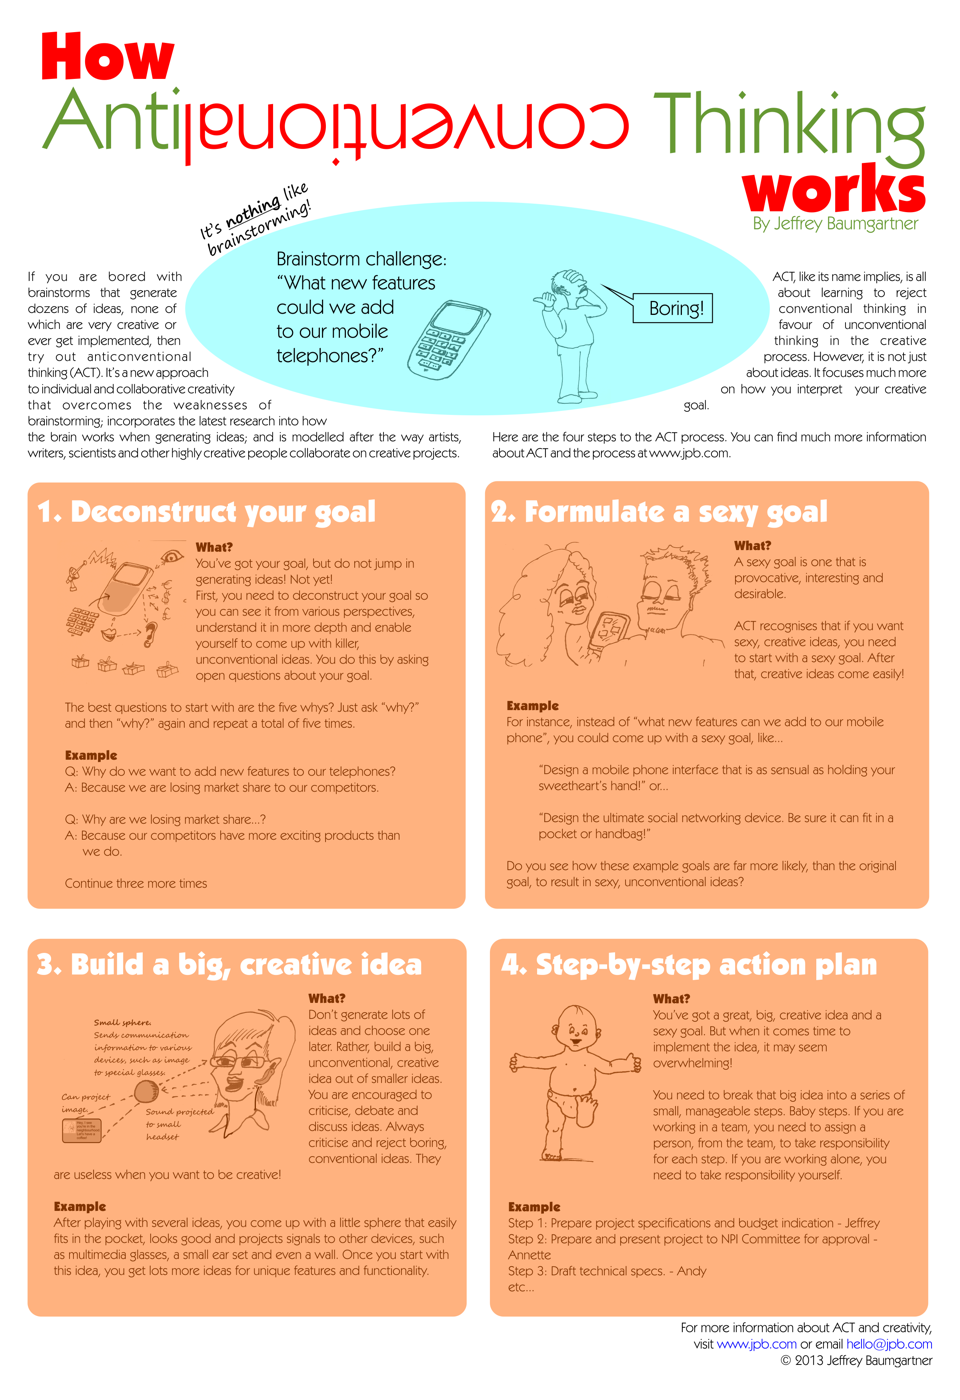 How anticonventional thinking (ACT) works - infographic